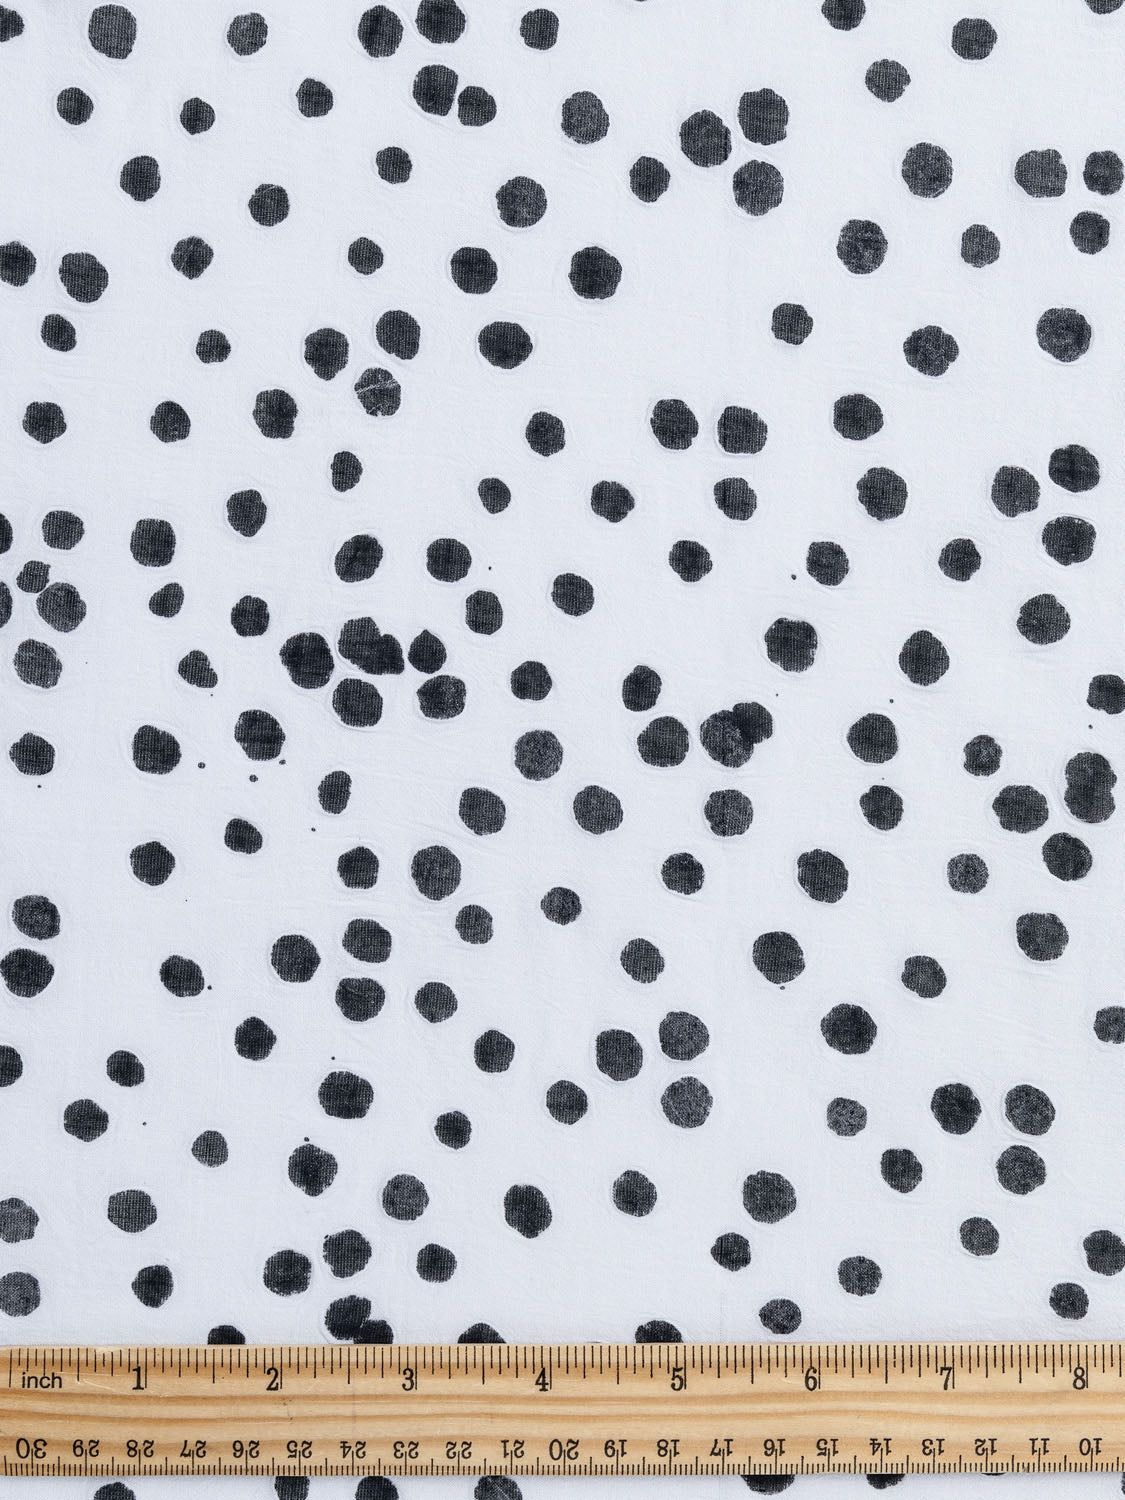 Hand Dyed Dotted Batik Cotton - White + Black - Swatch